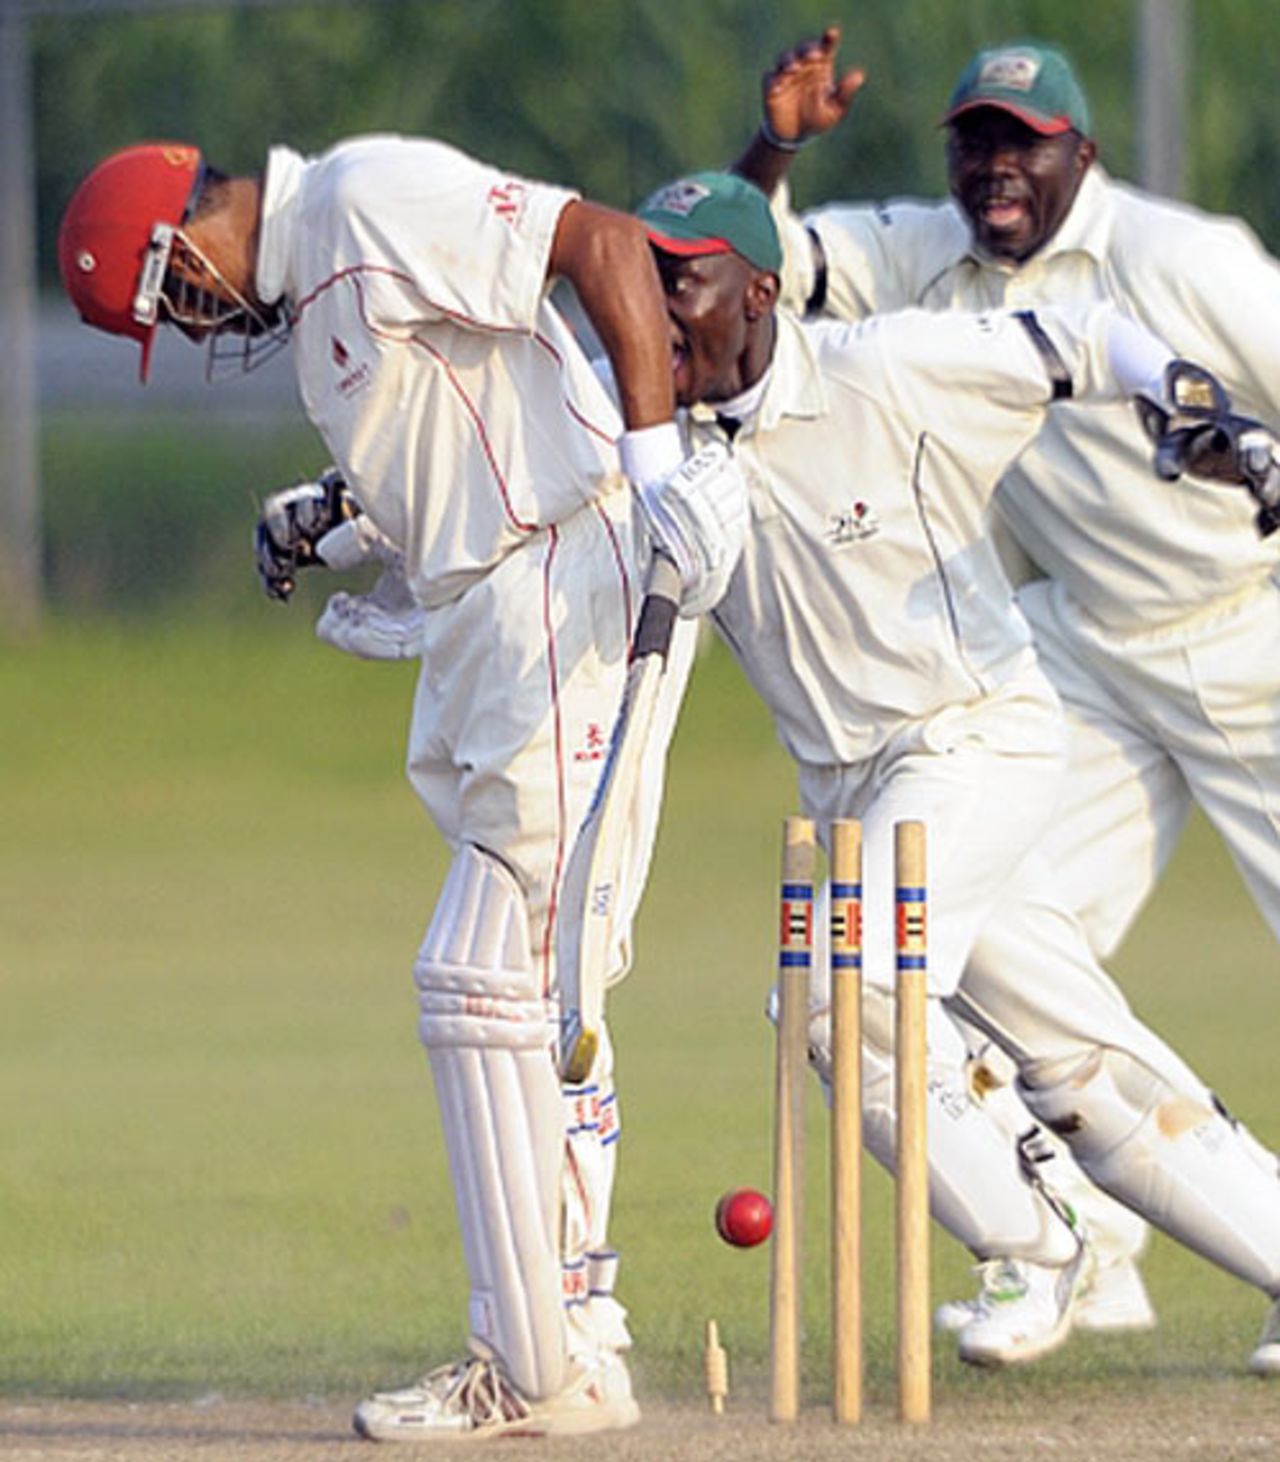 Sandeep Jyoti is clean bowled by Hiren Varaiya just before the close, Canada v Kenya, ICC Intercontinental Cup, King City, 3rd day, August 16, 2009 